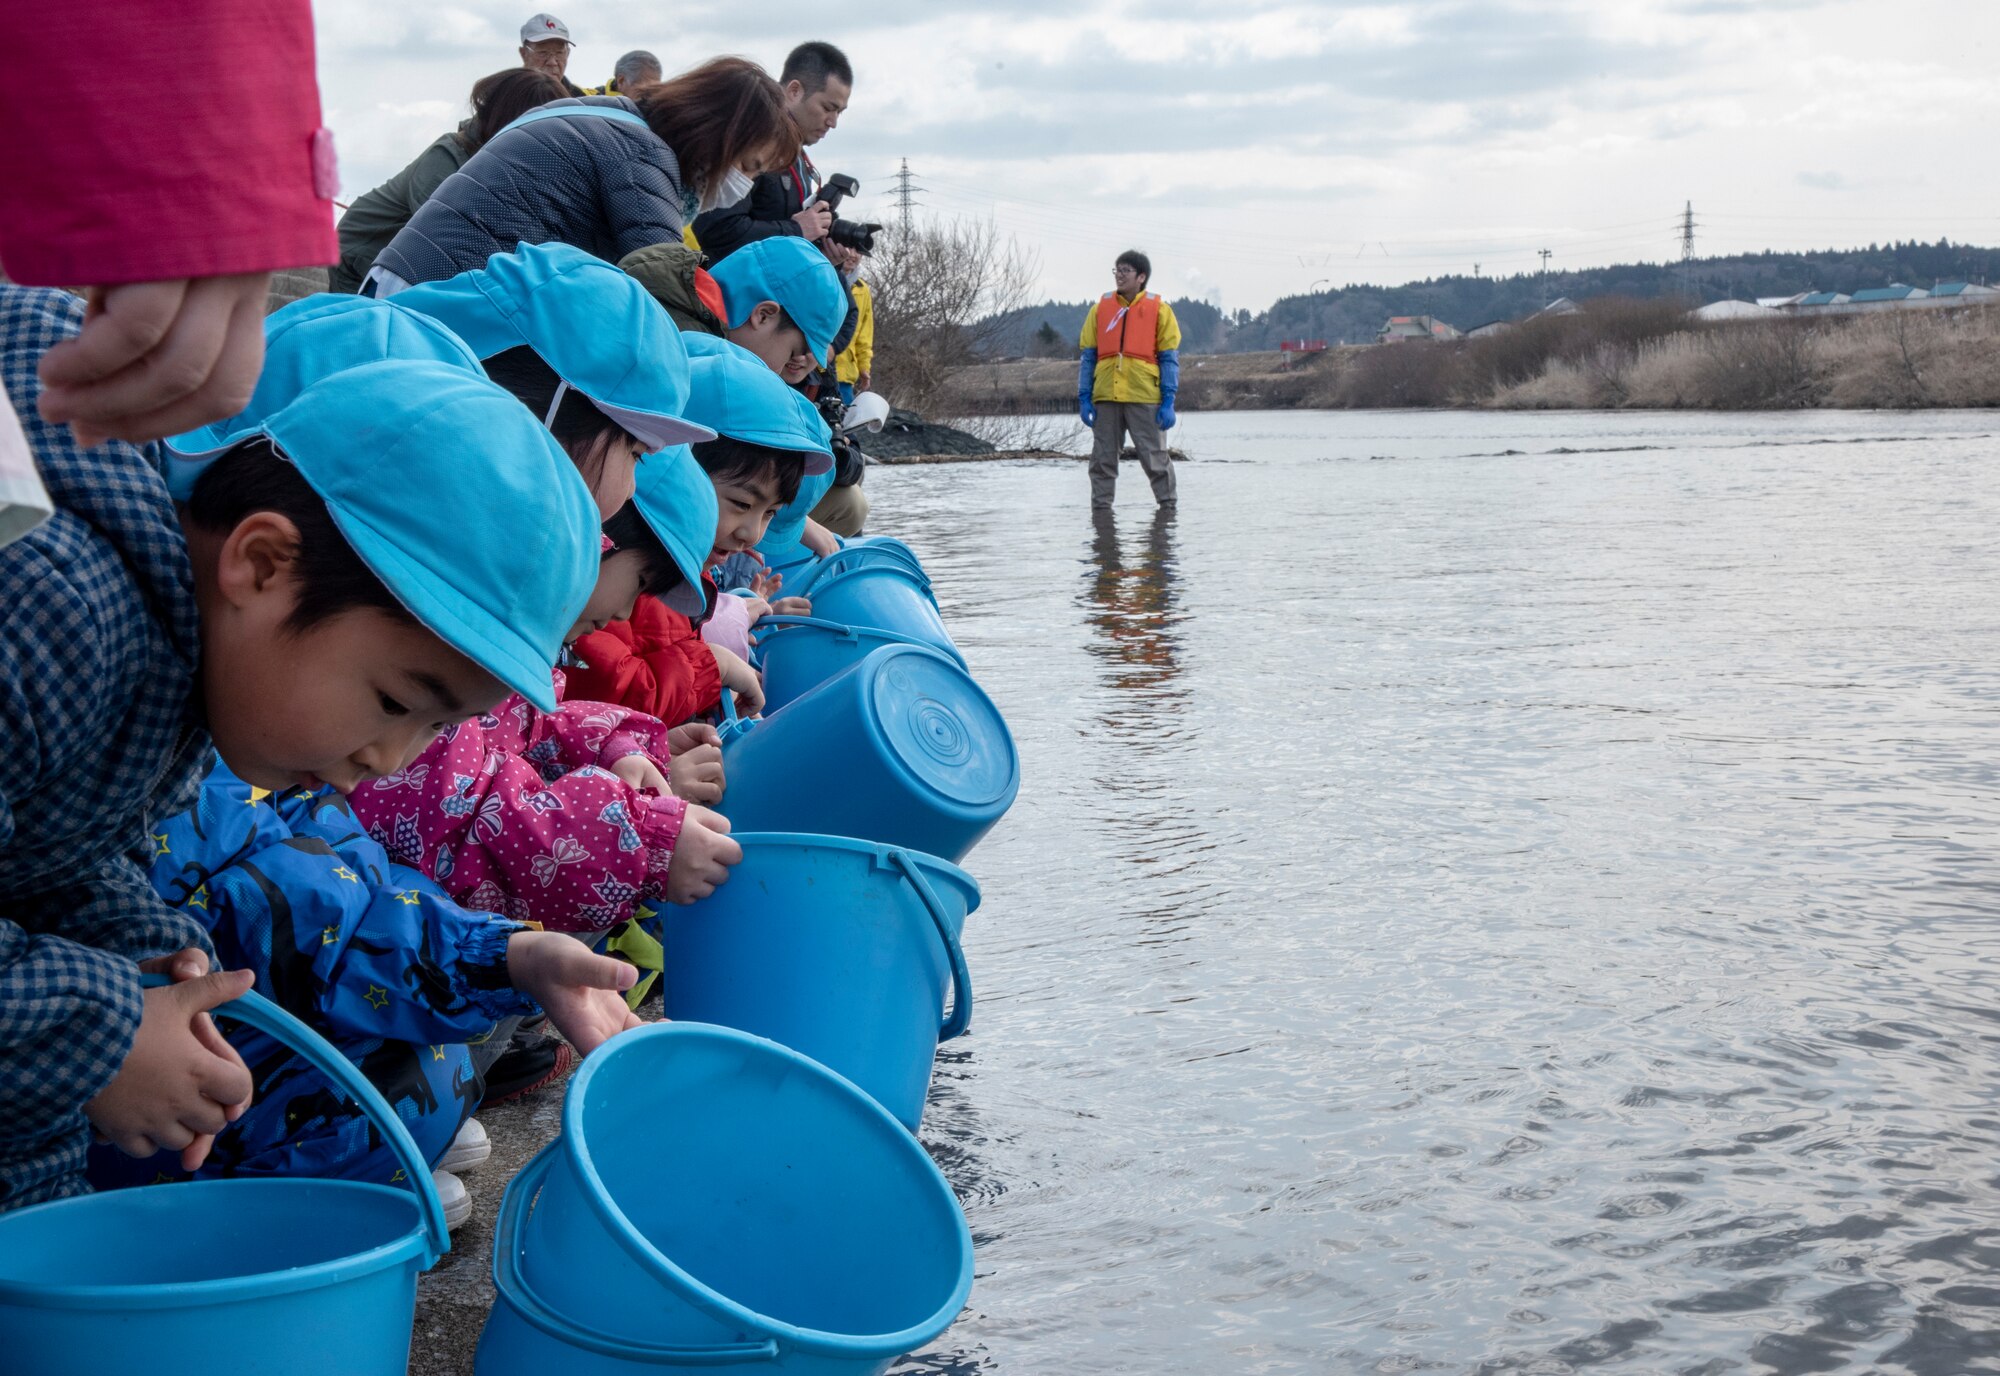 Children release baby salmon into the Oirase River for the 22nd Annual Baby Salmon Release at Shimoda Salmon Park, Japan, March 16, 2019. The baby salmon released during this event were bred from last season’s salmon catch. After living three to five years in the Northern Sea, the fish find their way back to the river to create future generations.